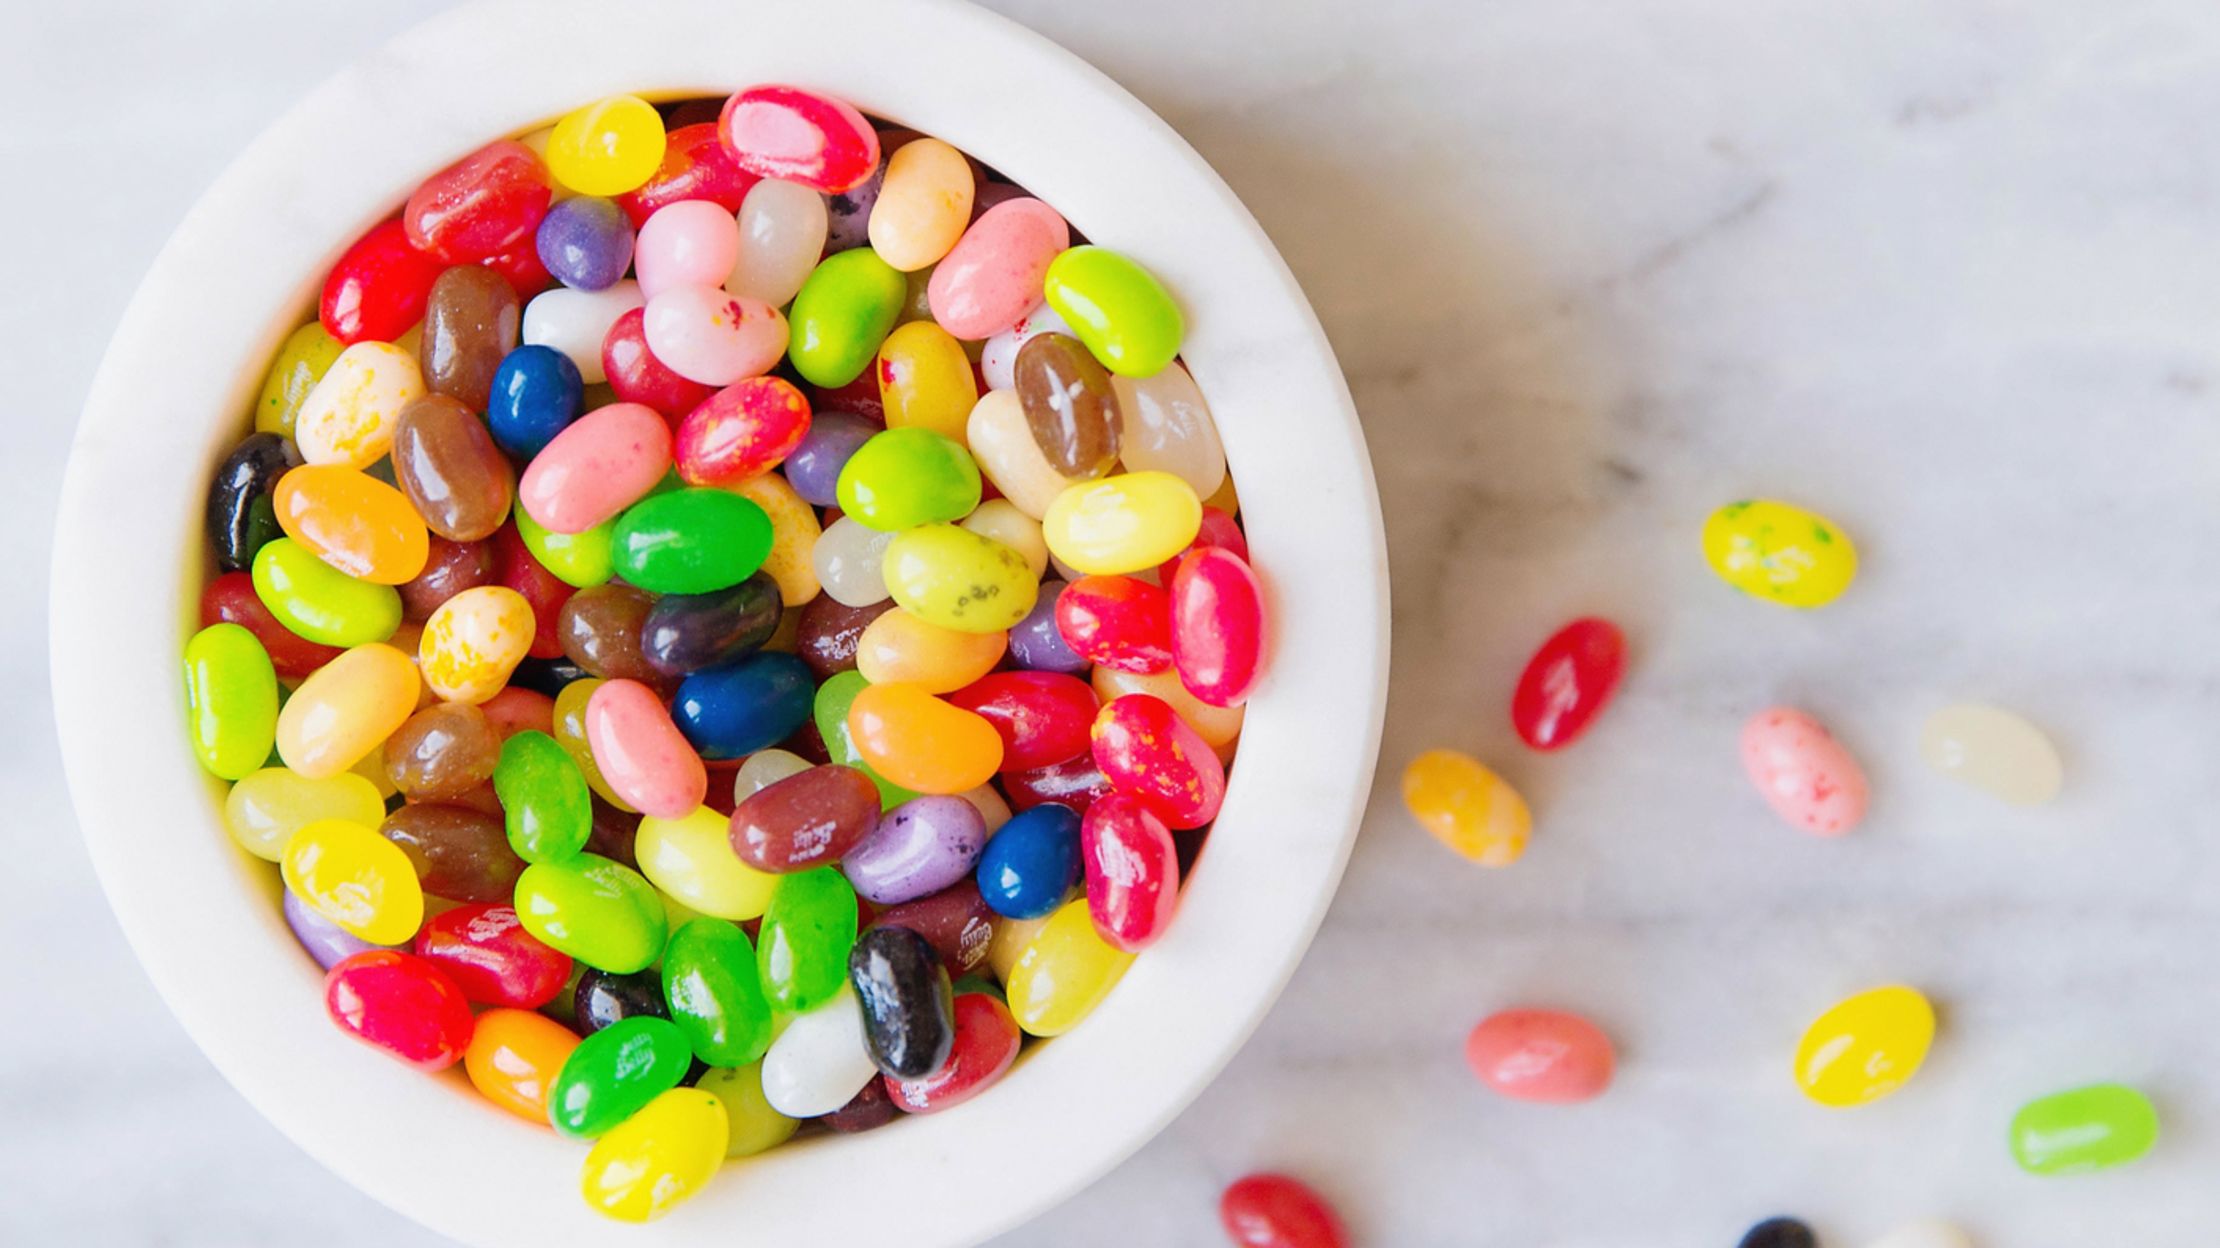 Jelly Beans Are Made With Insect Secretions. http://mentalfloss.com/article...